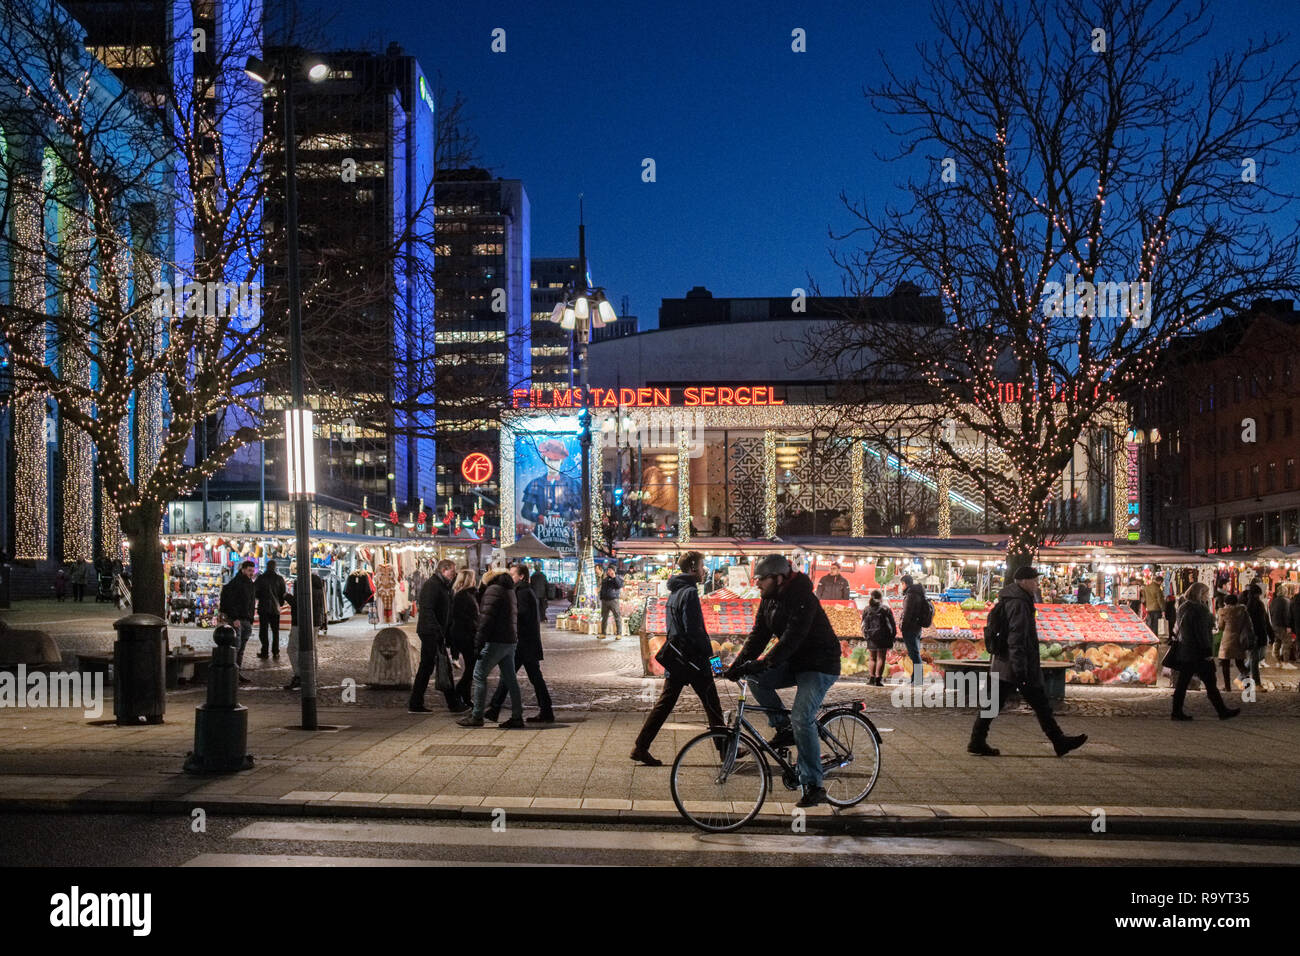 STOCKHOLM, SWEDEN - December 28, 2018: City Concert Hall and Farmers Market and Christmas decorations in Hötorget.Square Stock Photo